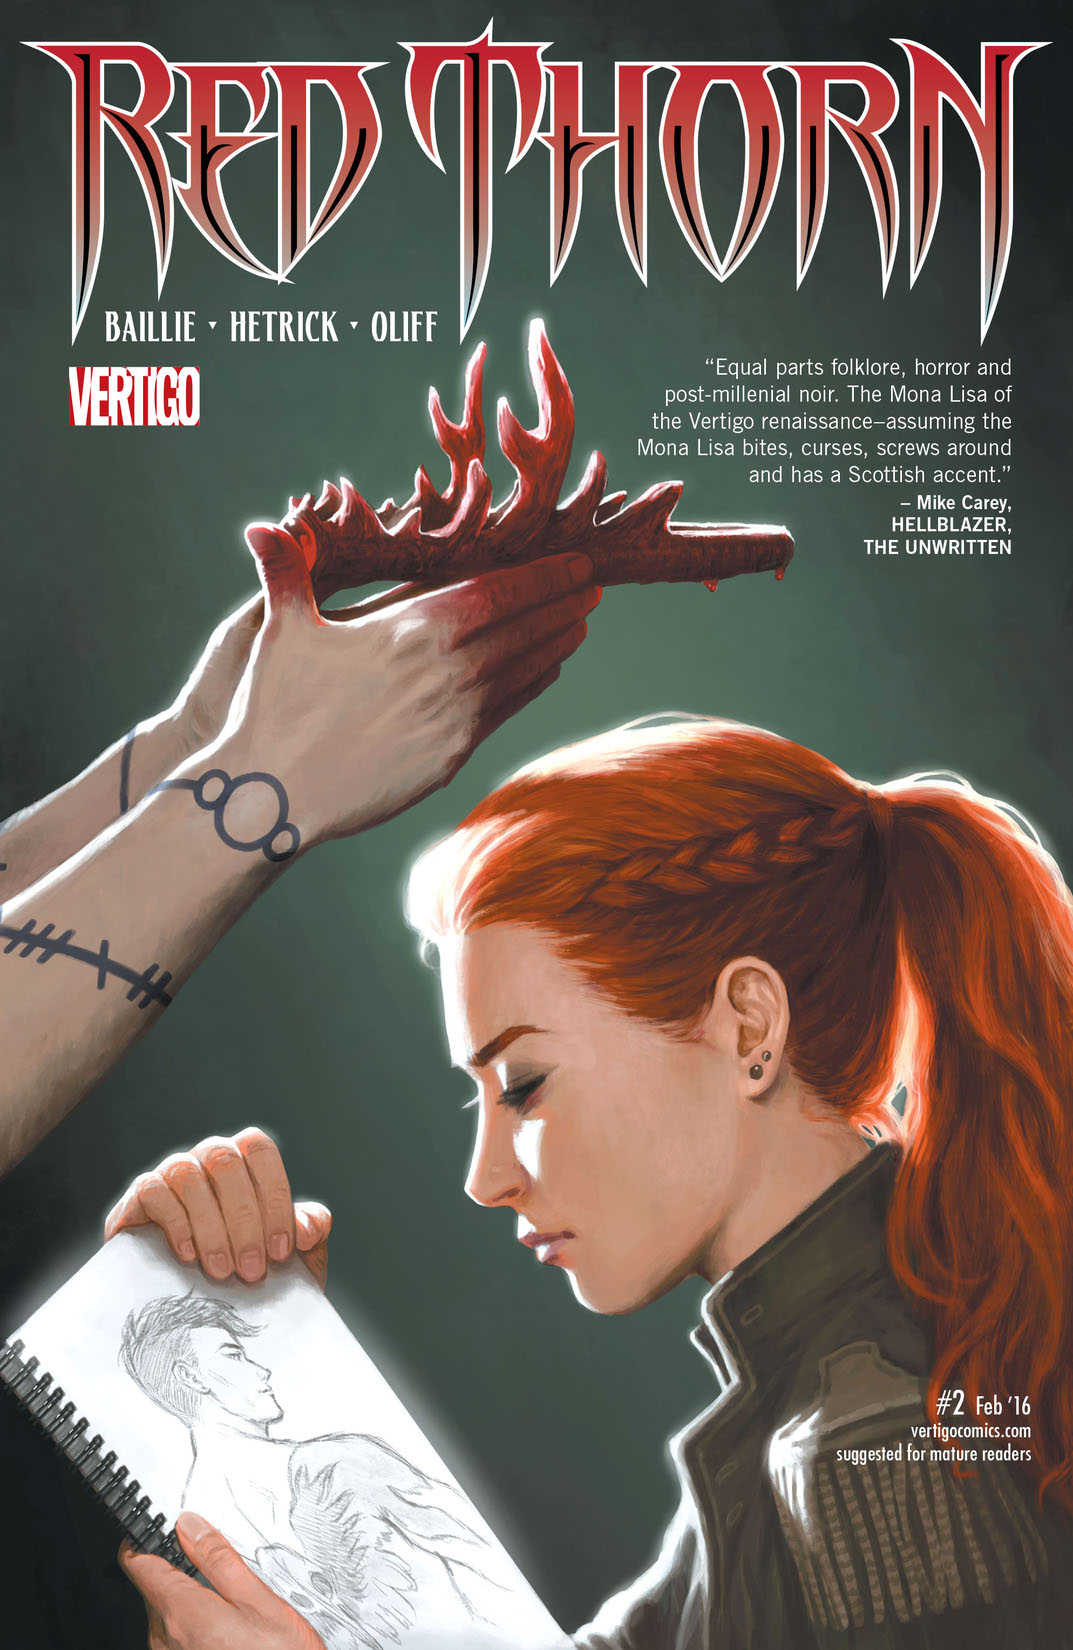 Red Thorn #2 preview images